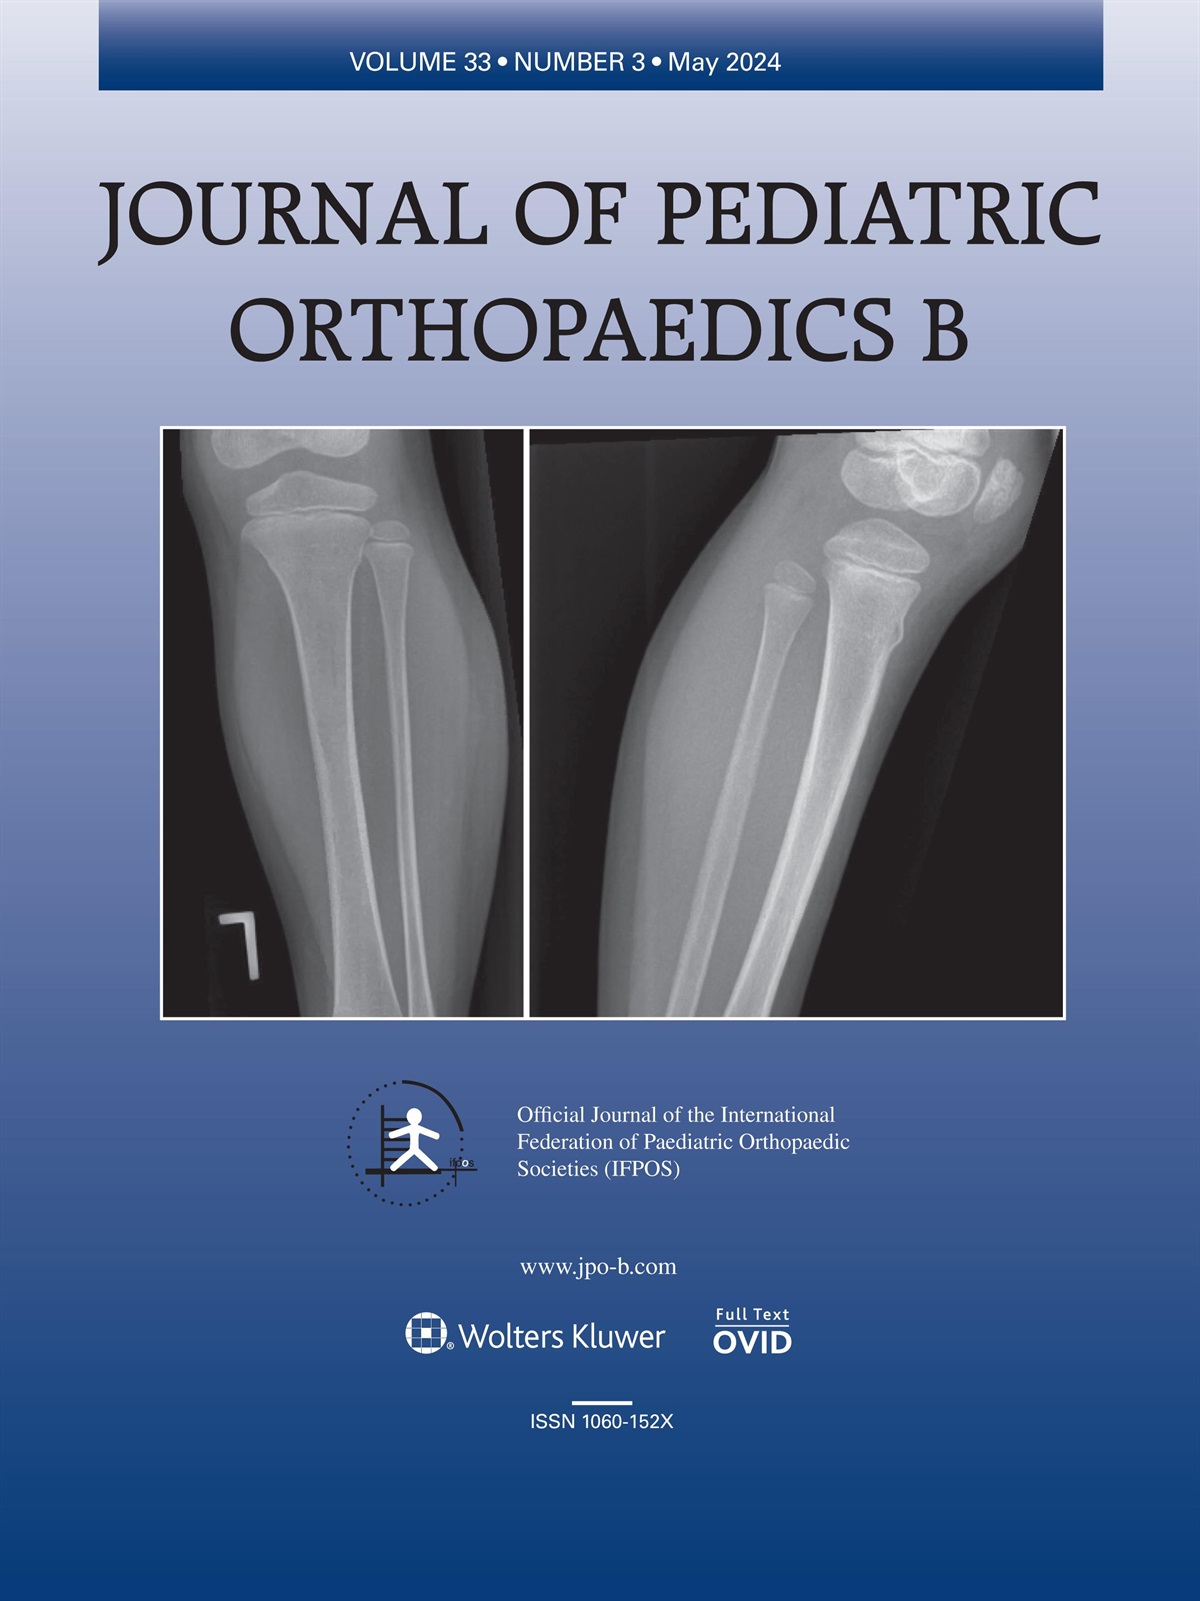 A comparison of cone beam computed tomography, standard computed tomography, and plain radiographs in the evaluation of medial epicondyle humerus fractures